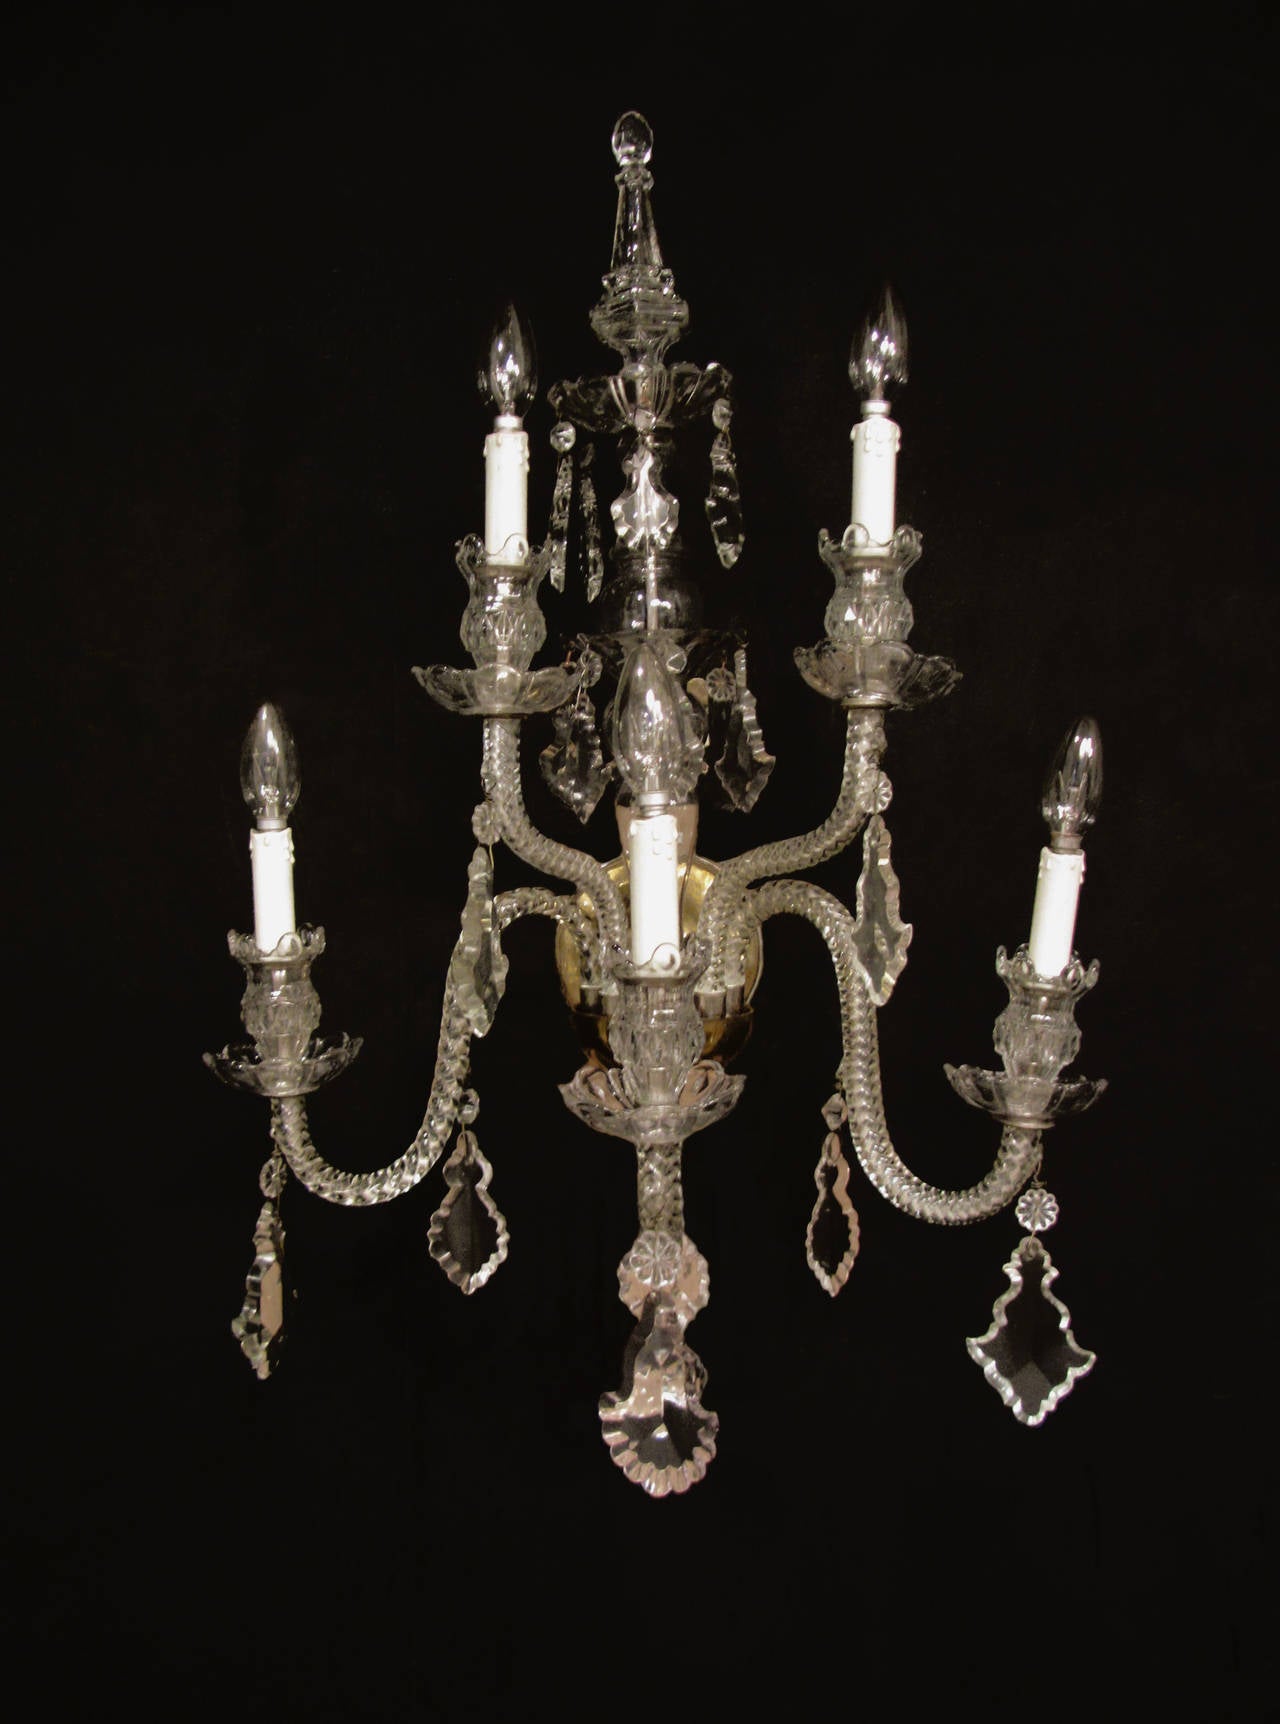 A pair of fine cut-glass, five-arm Victorian wall lights. The scrolling arms are arranged over two levels with cut-glass plaques, drip pans and a fine cut-glass finial at the top.